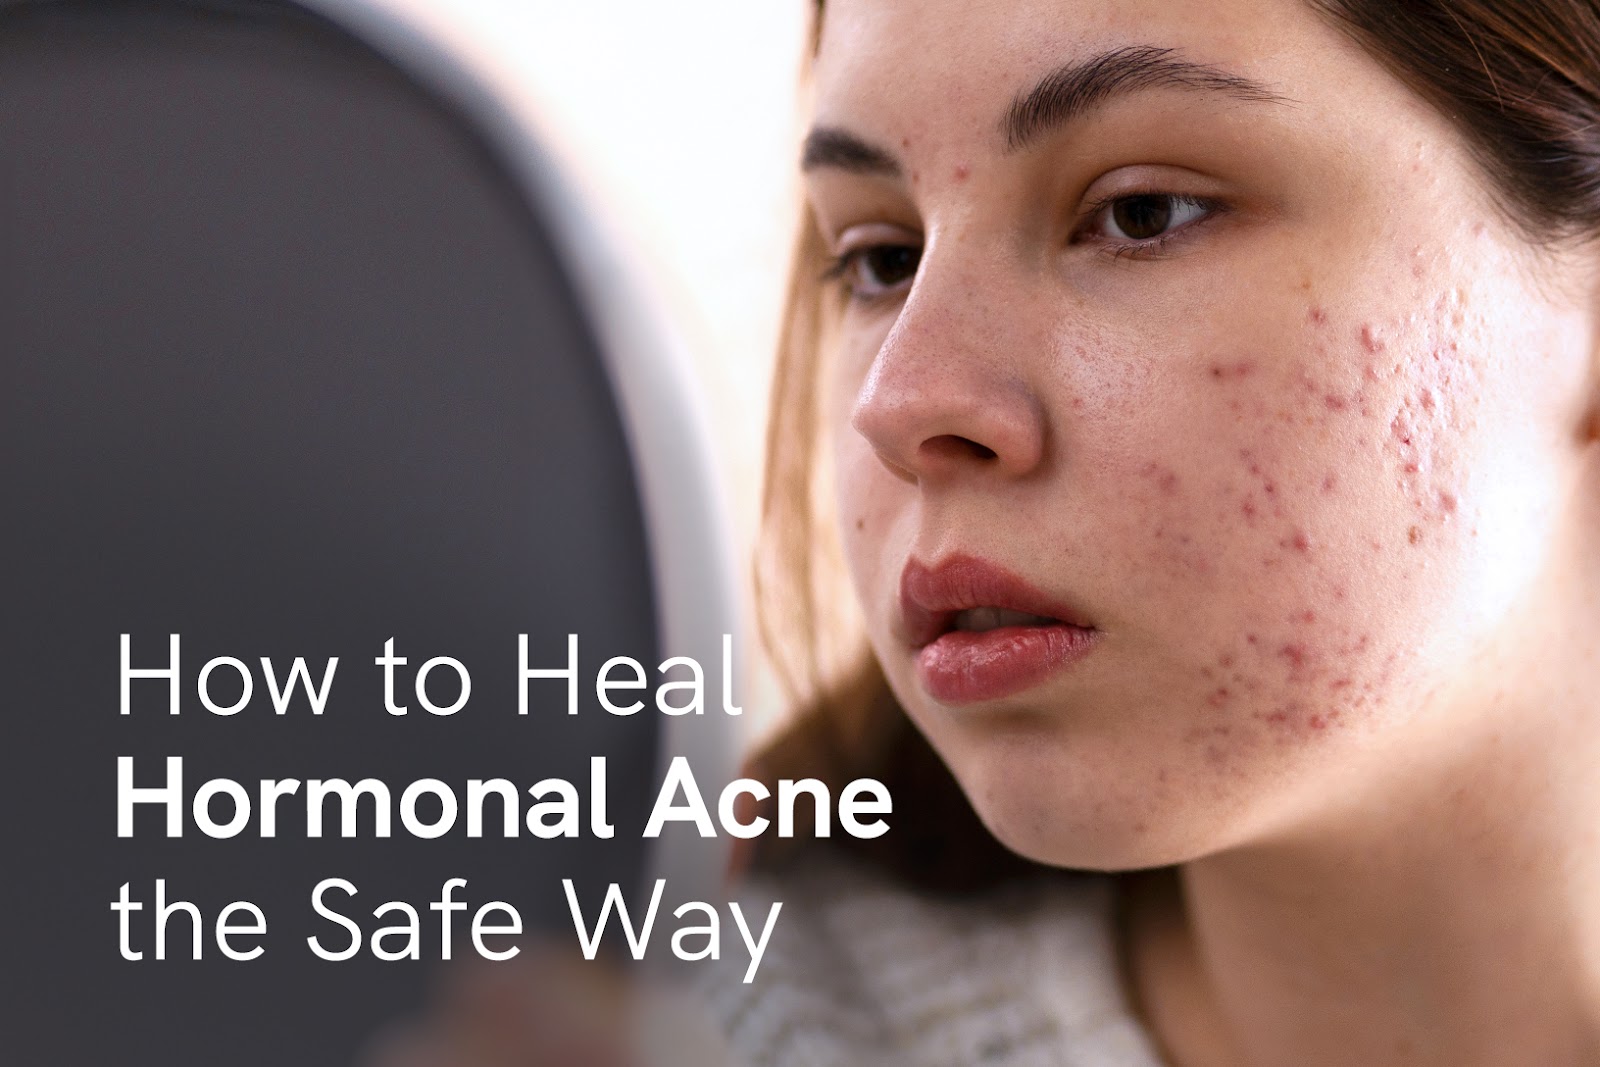 Get Clear Skin: Heal Hormonal Acne Holistically with the Flawless Twins